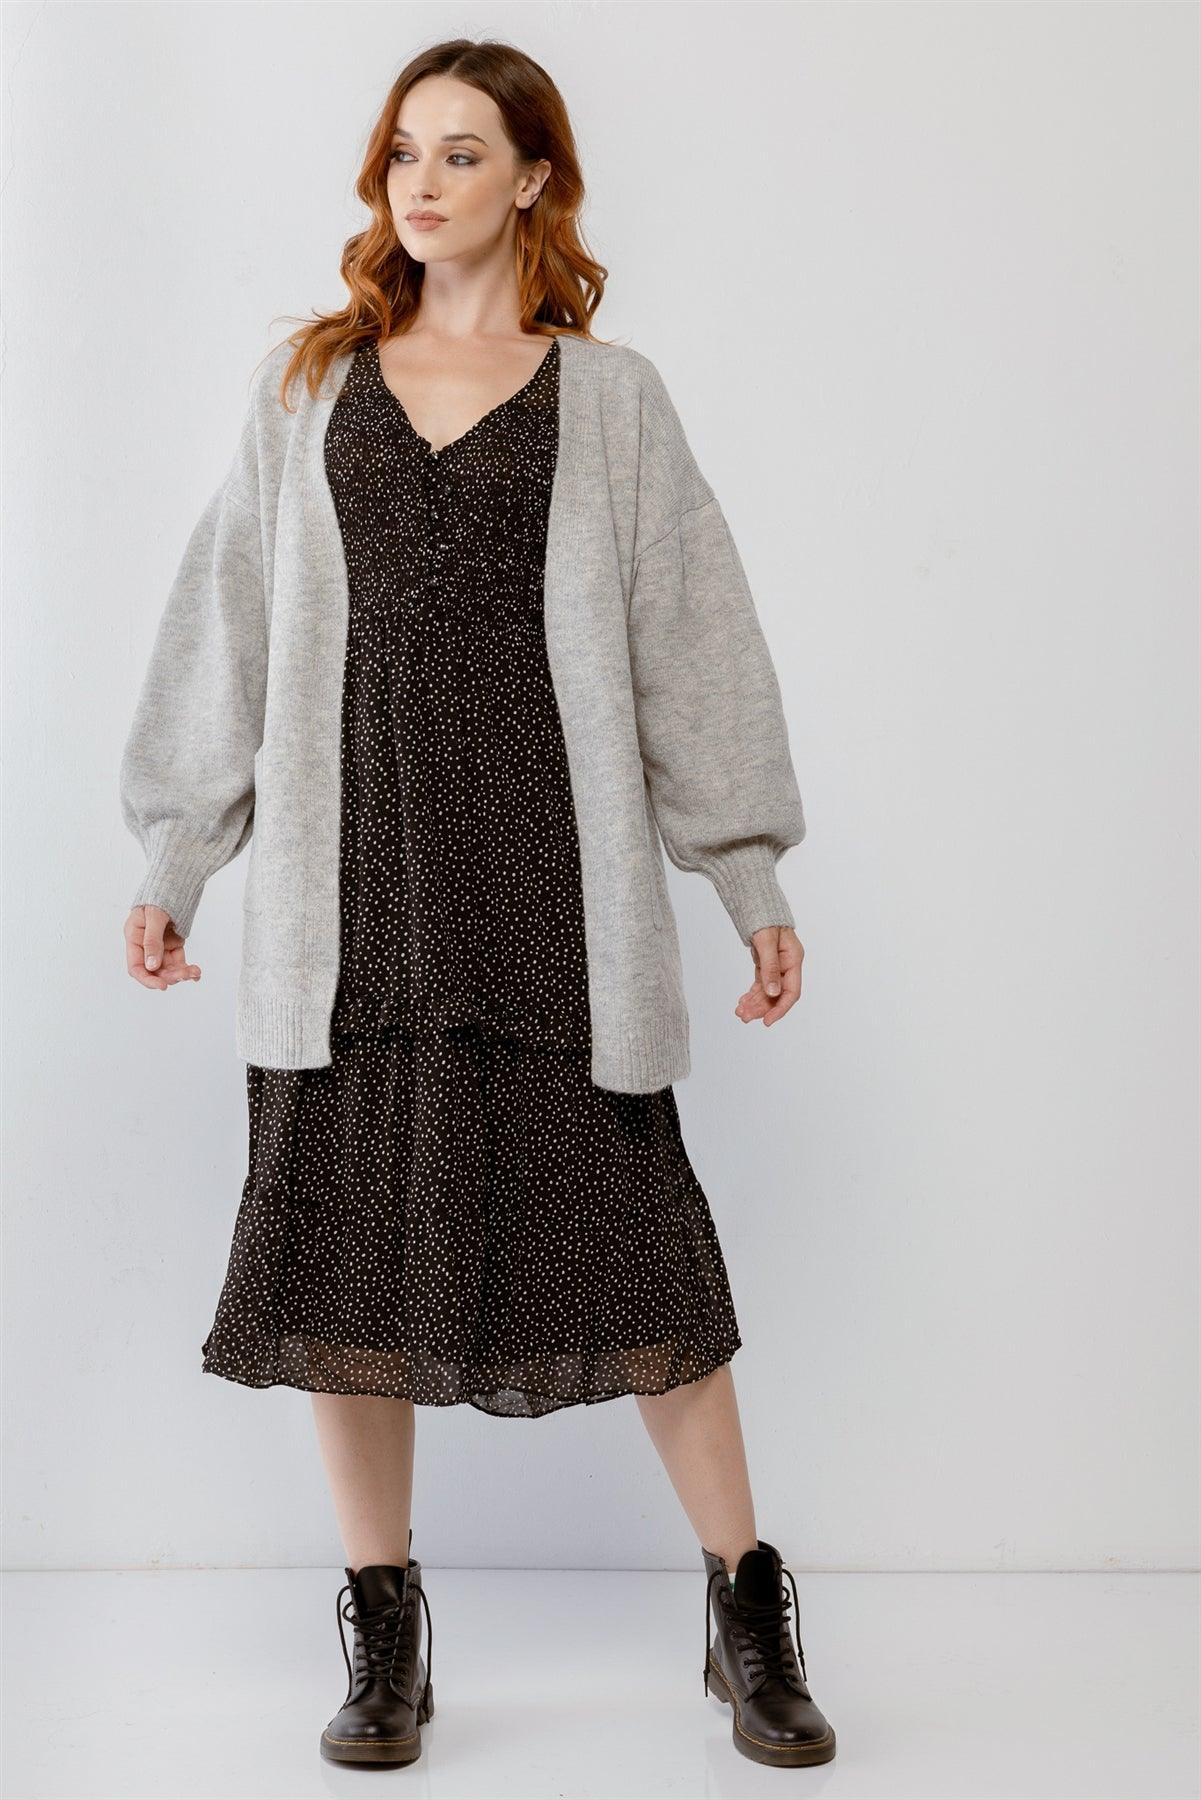 Heather Grey Knit Two Pocket Soft To Touch Open Front Cardigan /2-2-2